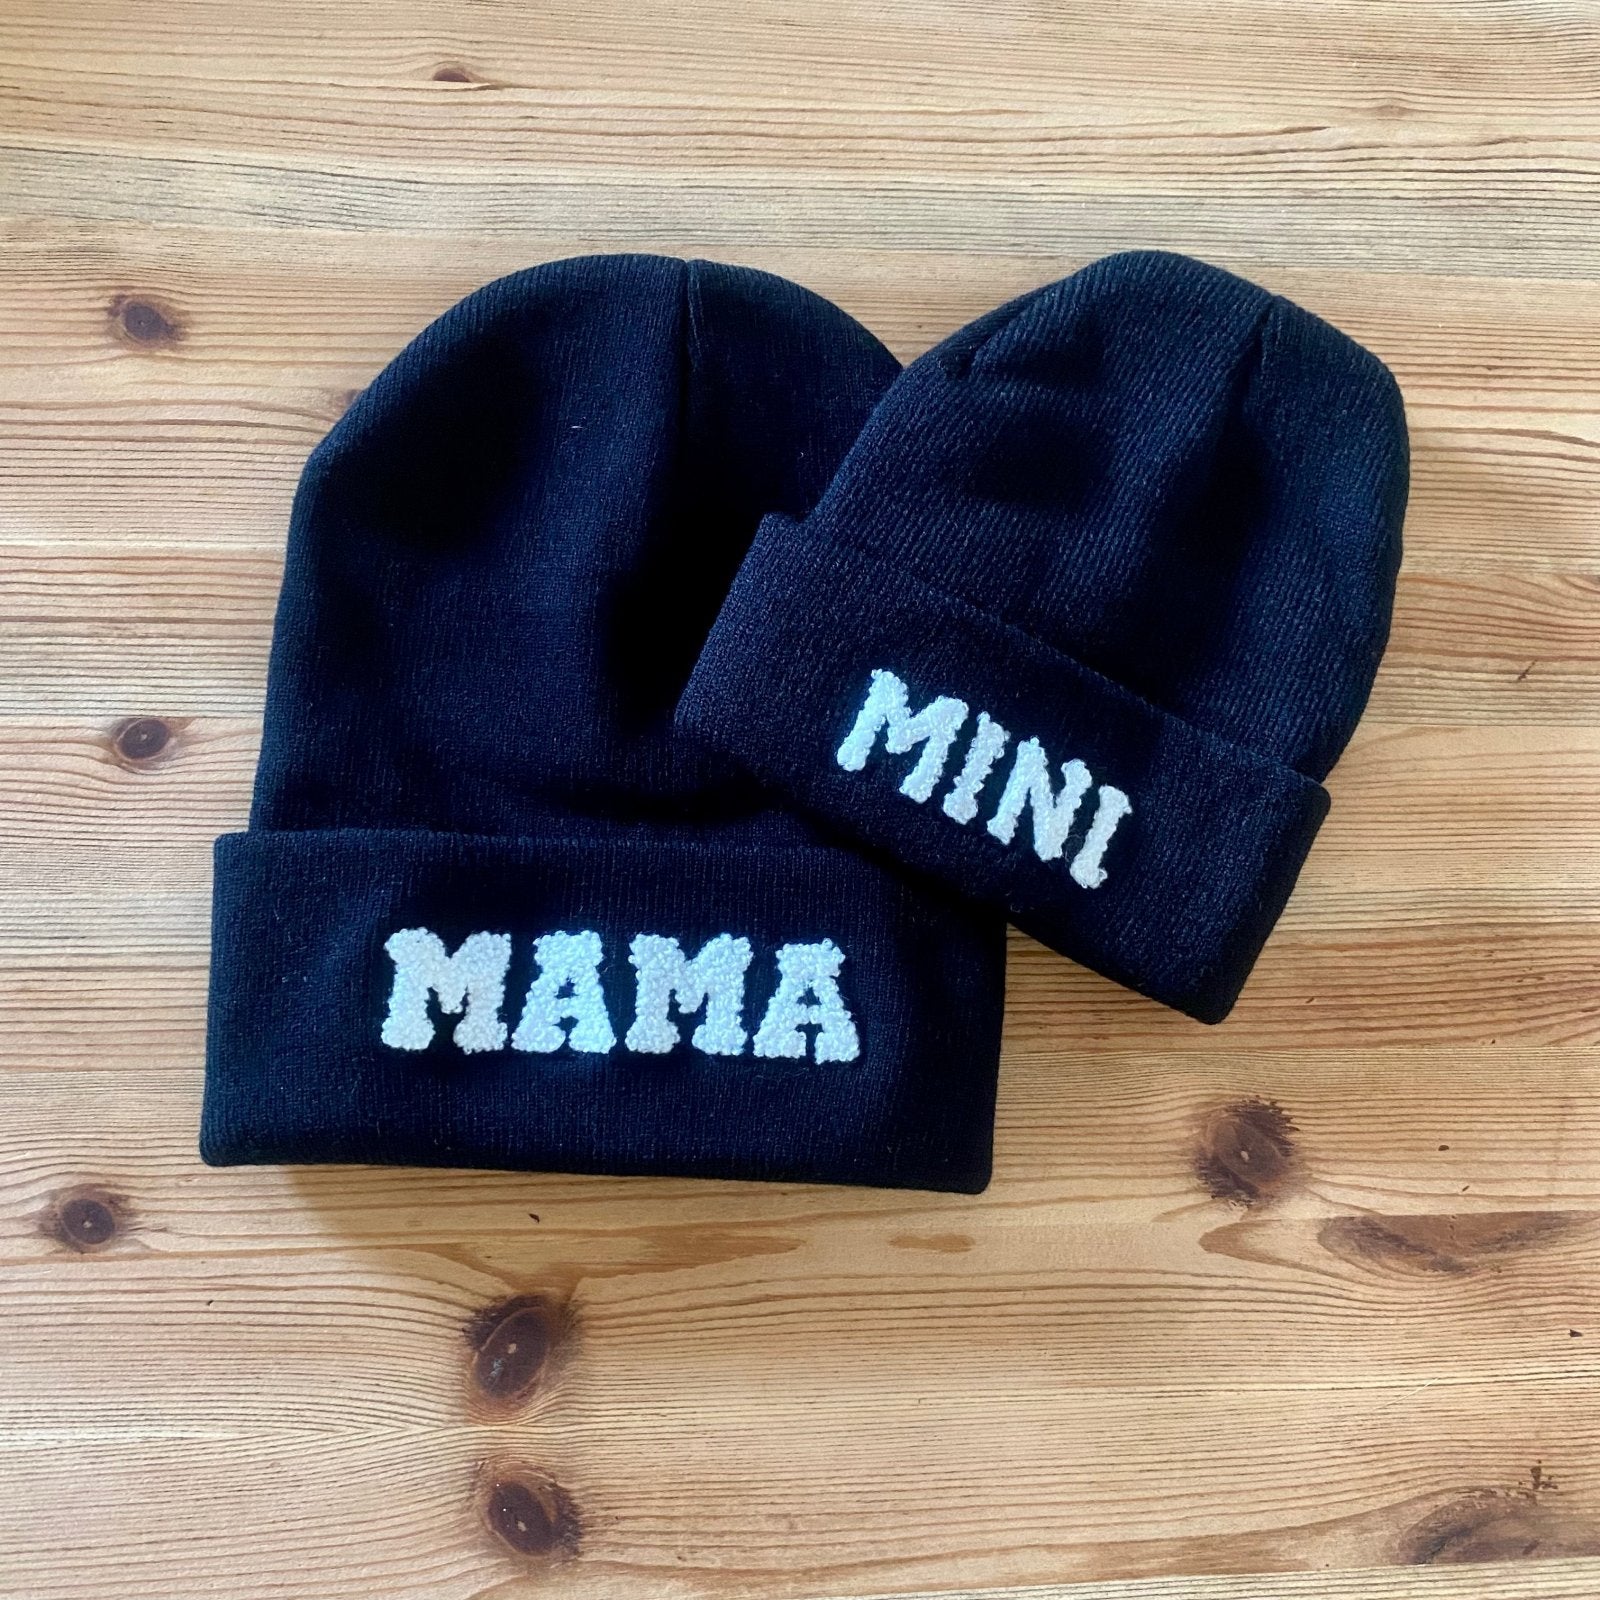 „Mini“ Beanie find Stylish Fashion for Little People- at Little Foxx Concept Store